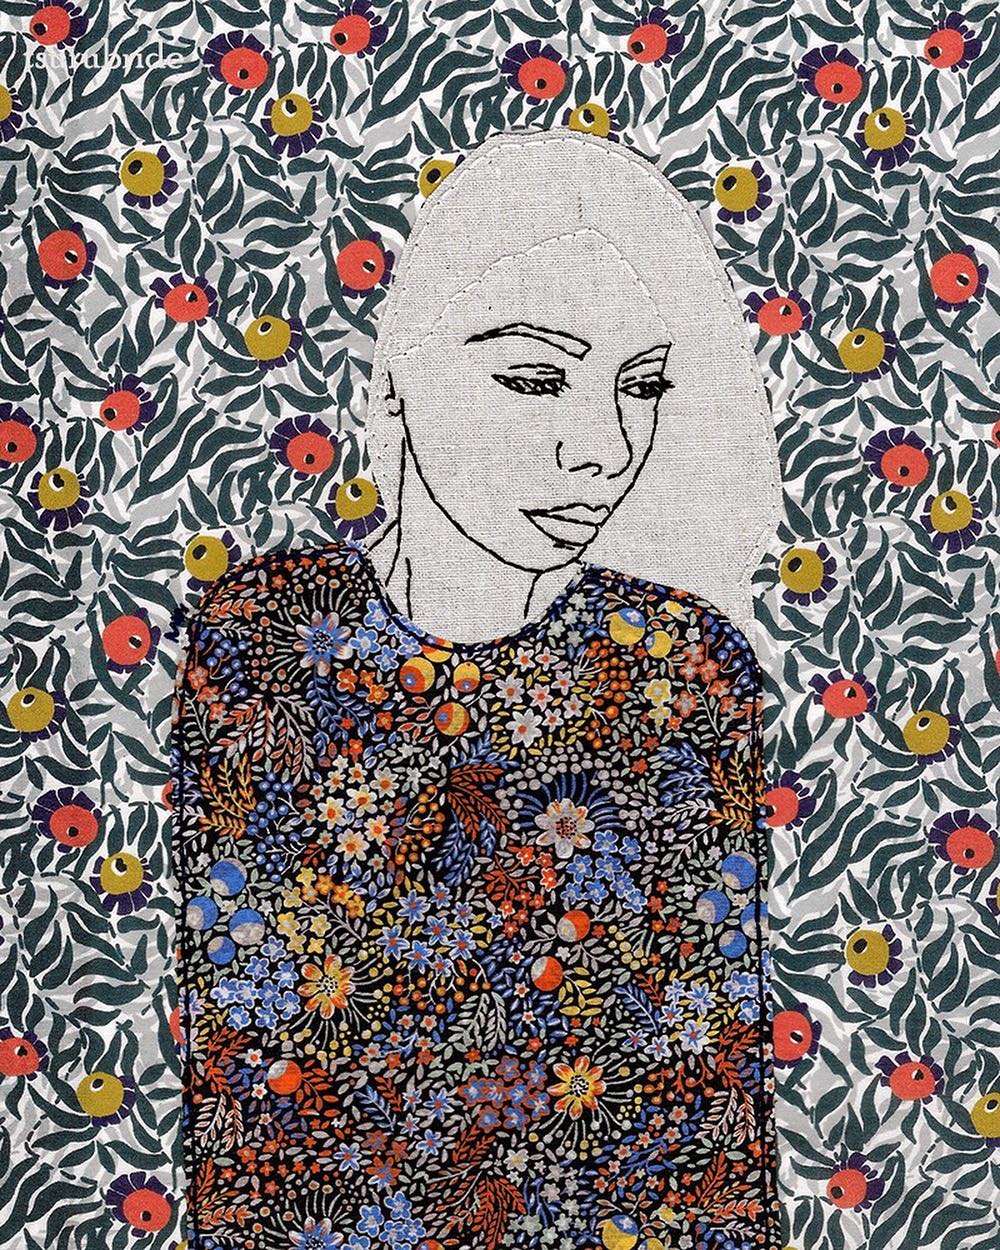 Appliqué embroidery of women by Meghan Willis